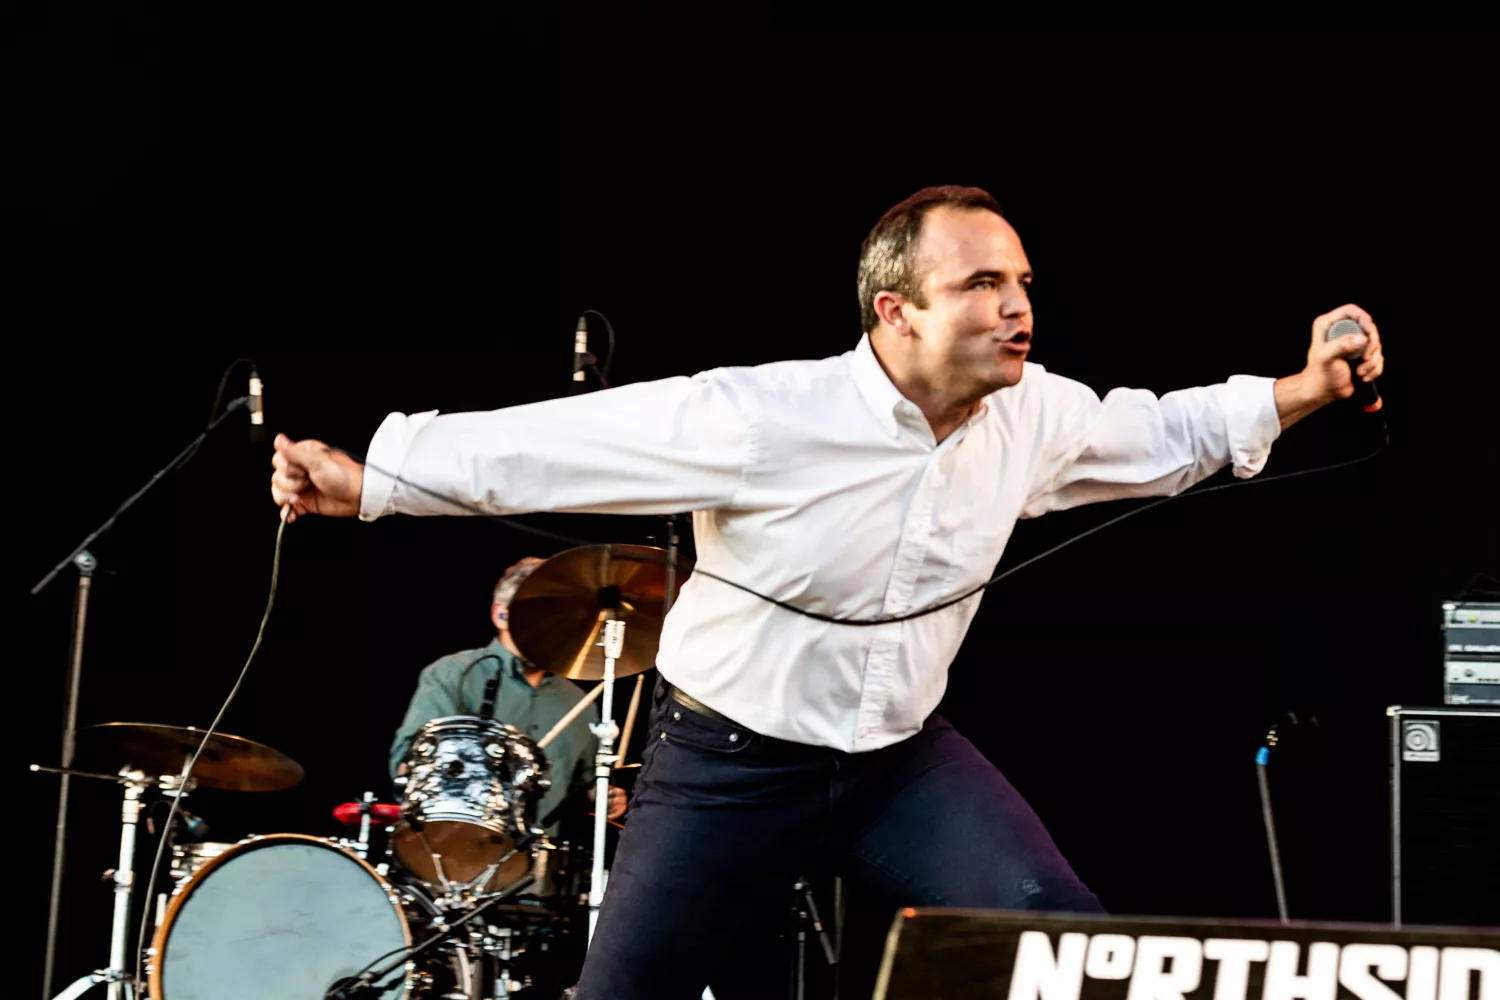 NorthSide, Green Stage - Future Islands